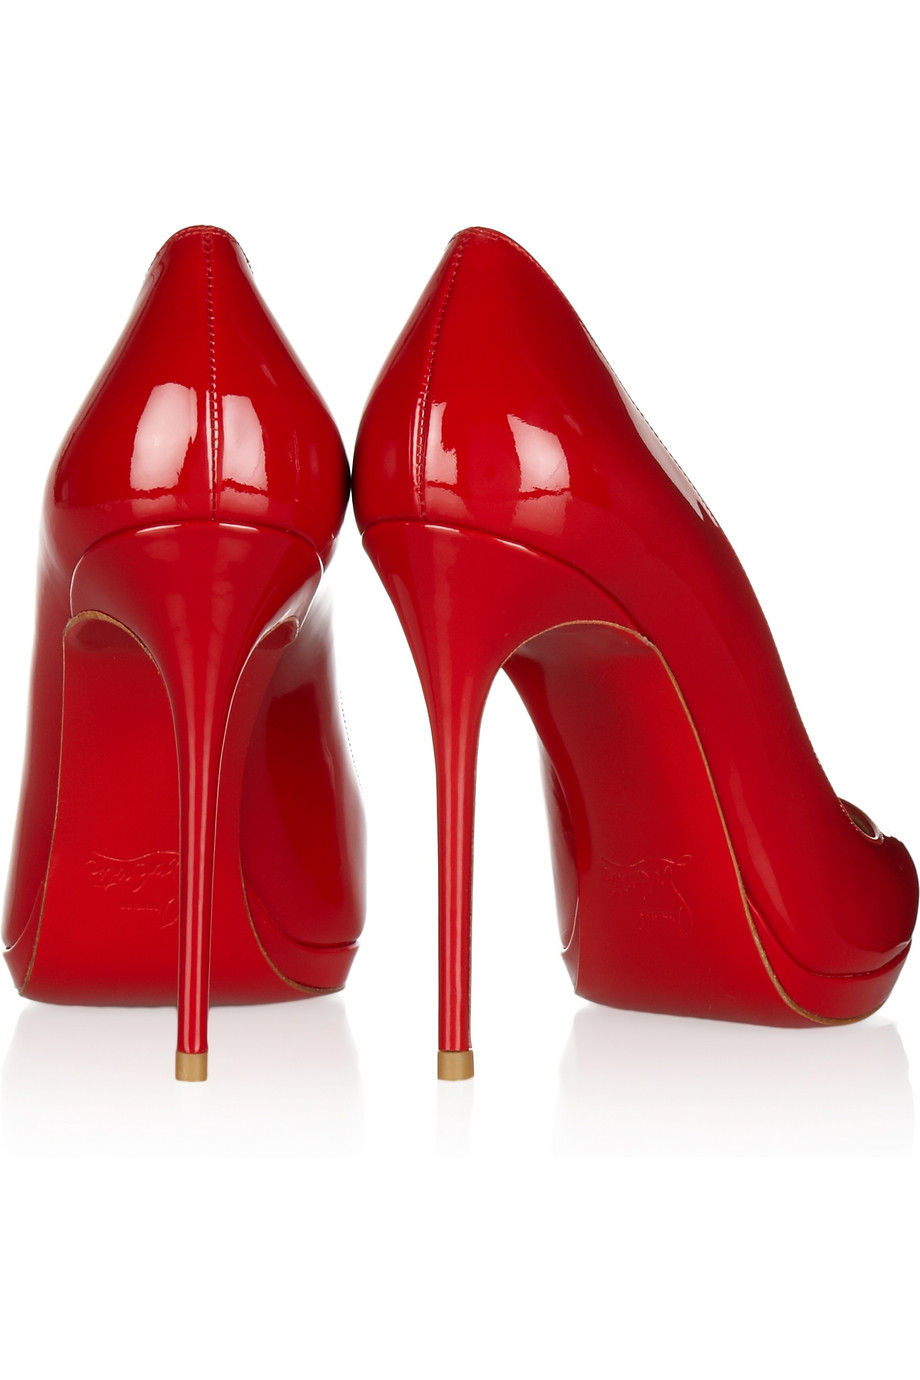 Christian Louboutin's red soles are a 